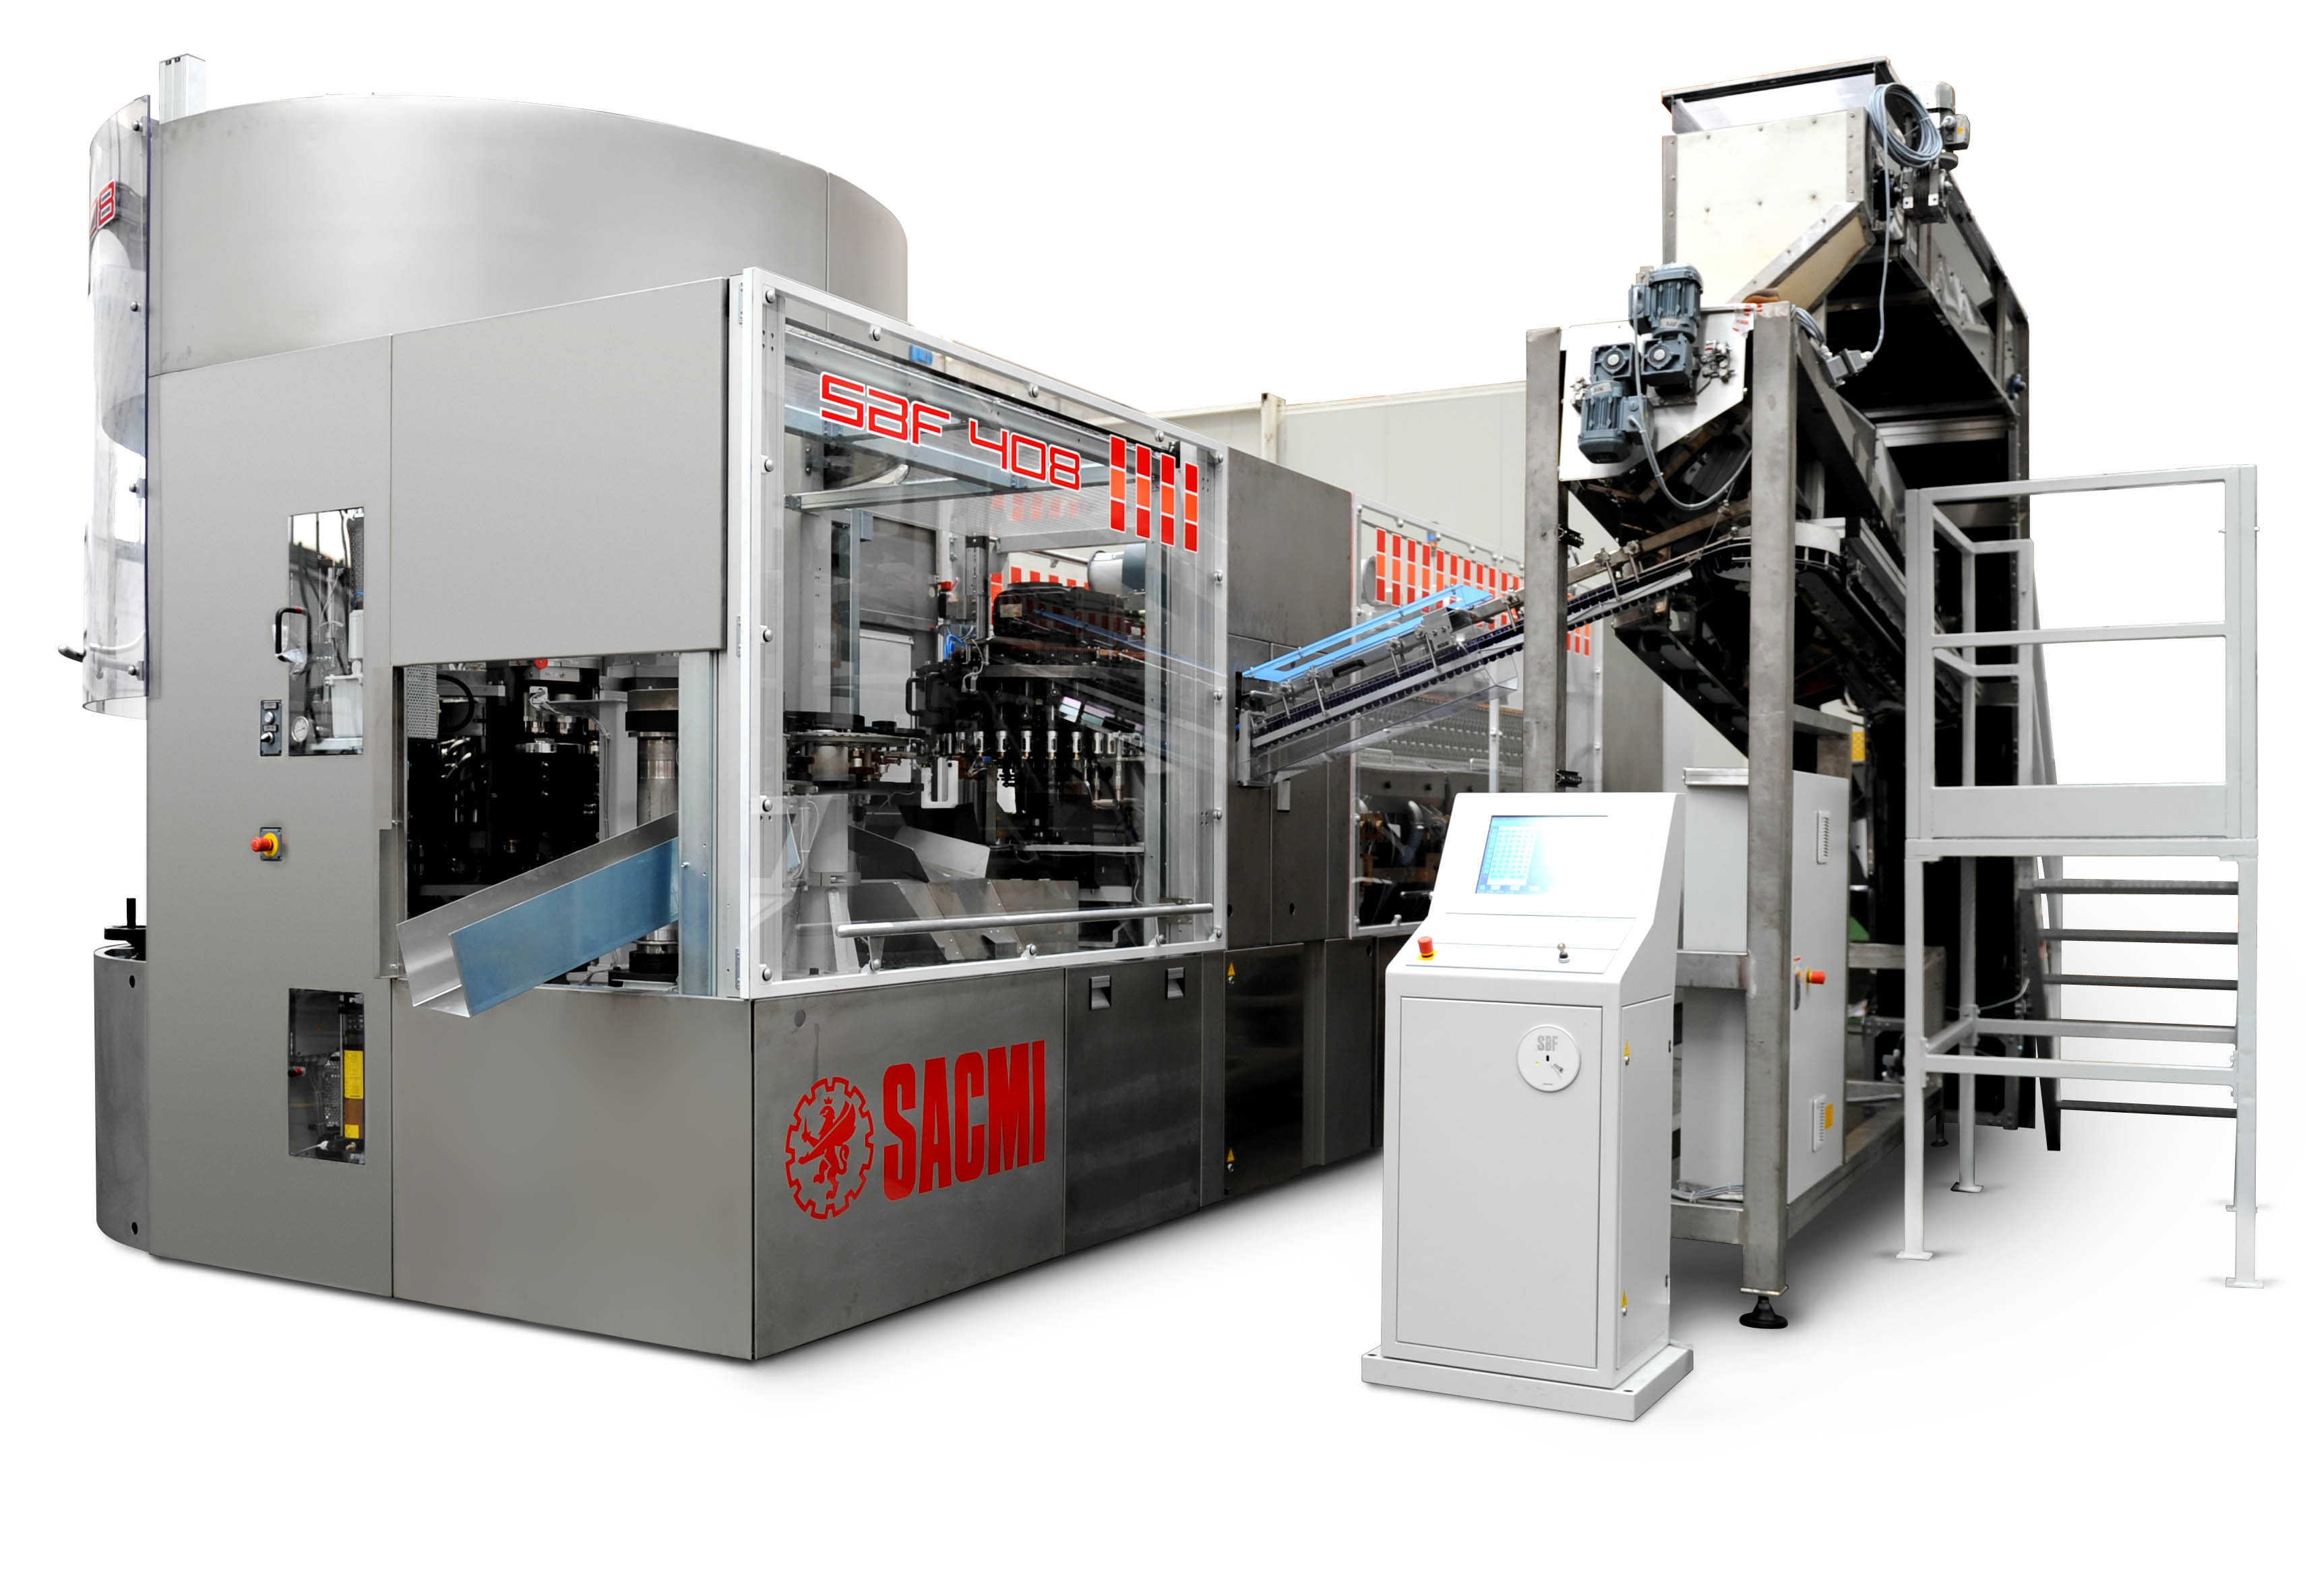 New Sacmi stretch blow moulding machines: ideal partners for every bottling line